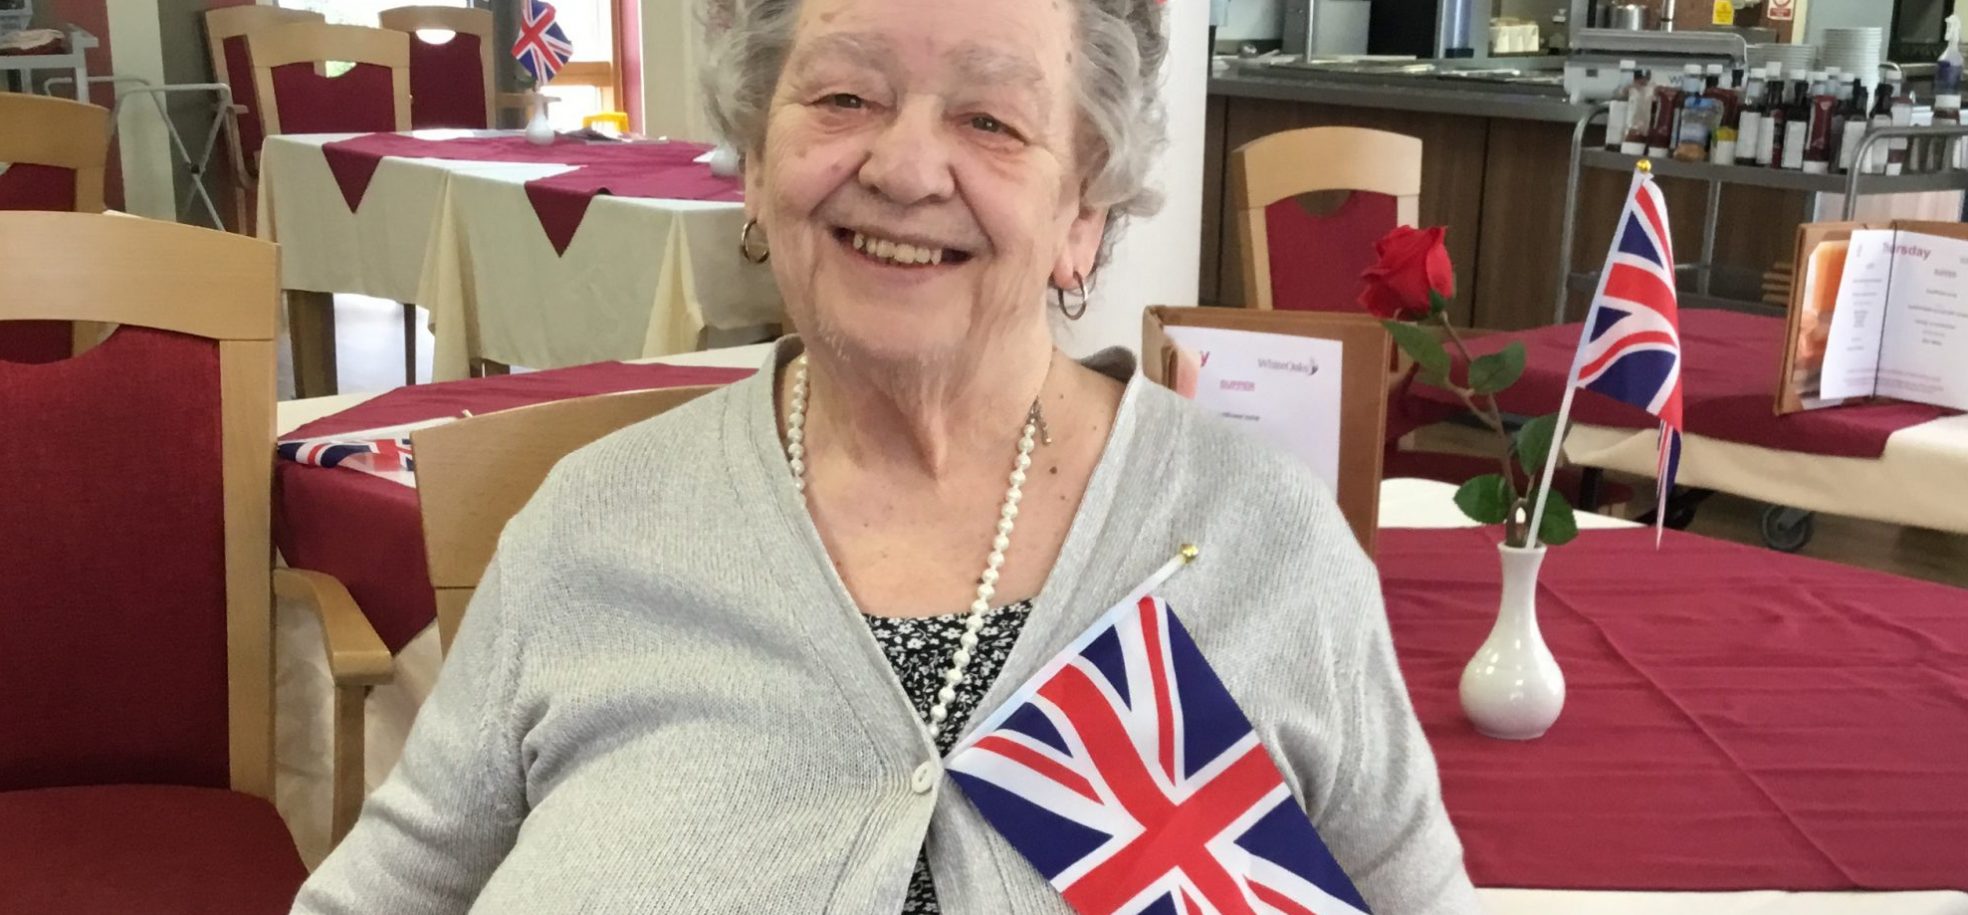 Resident Eve Dacey at James Terry Court in Croydon on VE Day